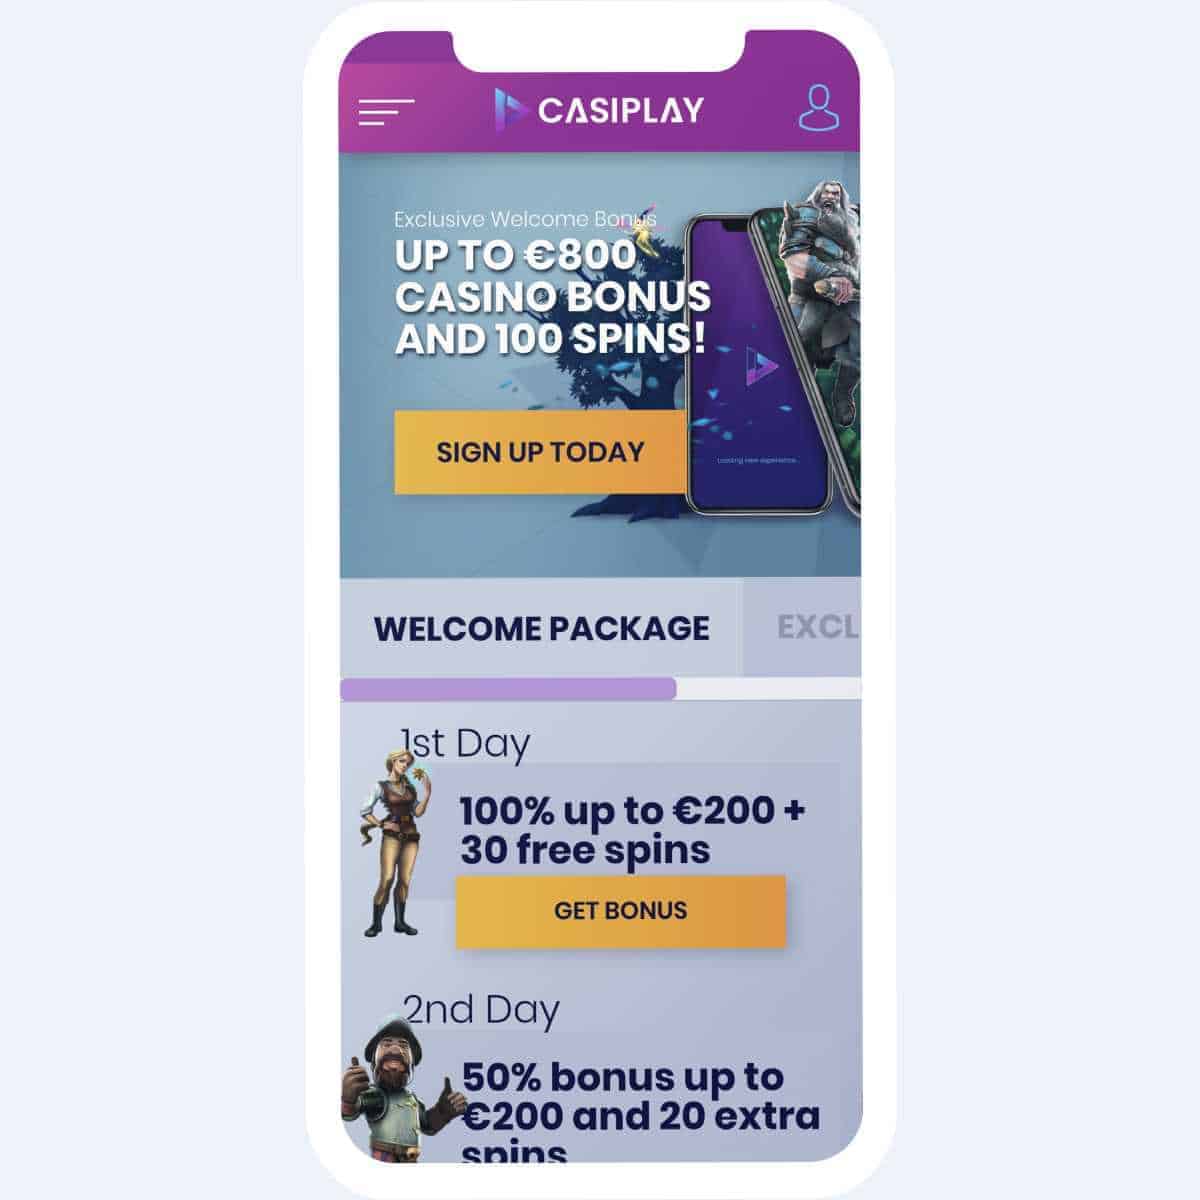 casiplay promotions mobile